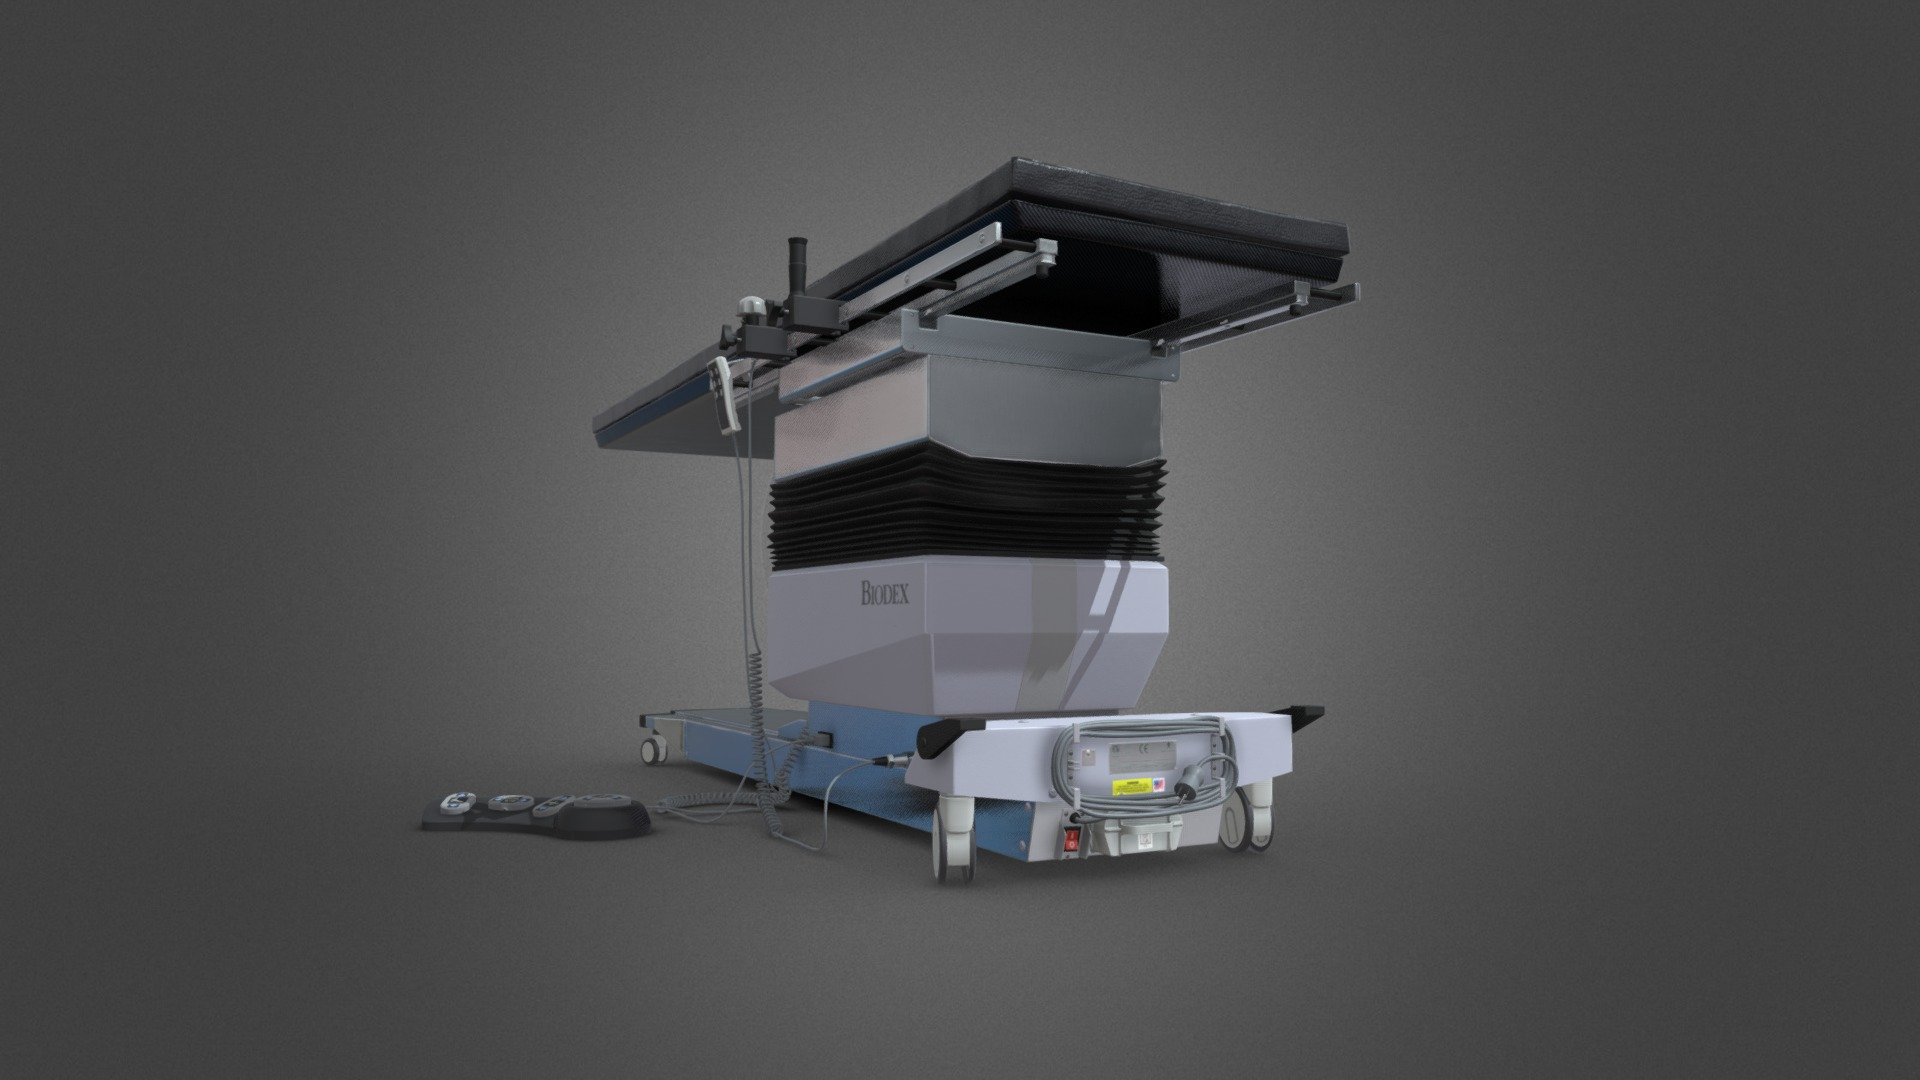 This was an art test I took. The task was to prepare a simple grey box scene of an operating room in Unity with baked lighting setup. One focal foreground asset with a high priority should be fully modeled and textured. I have chosen to make this operating table as my focal asset.

The intended use is within a training VR experience for surgeons that runs on high-end hardware, so the model has high polycount (140K Tris) and uses 4 2K texture sets 3d model